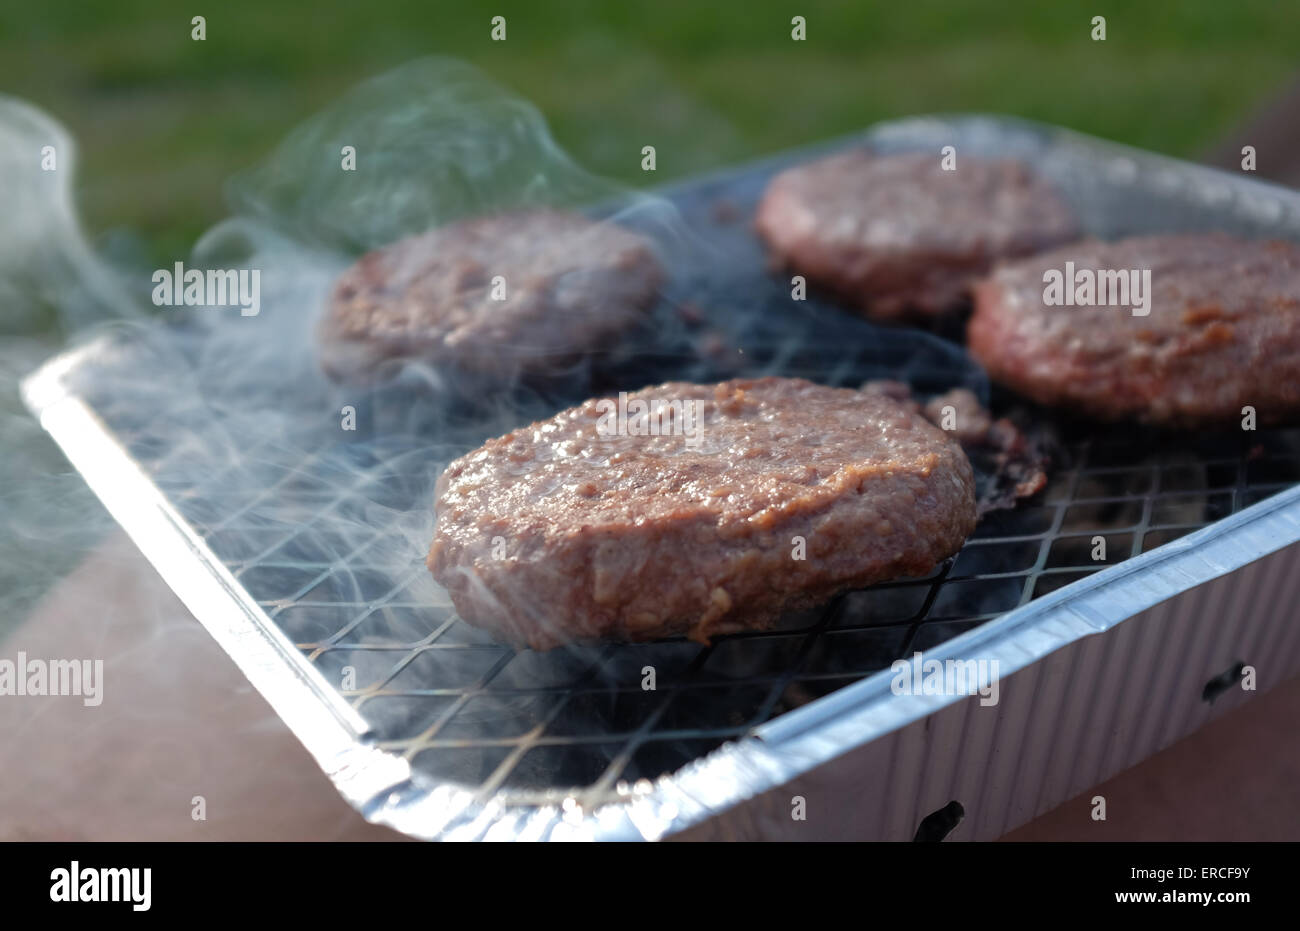 Burgers cooking on a disposable barbecue BBQ Stock Photo